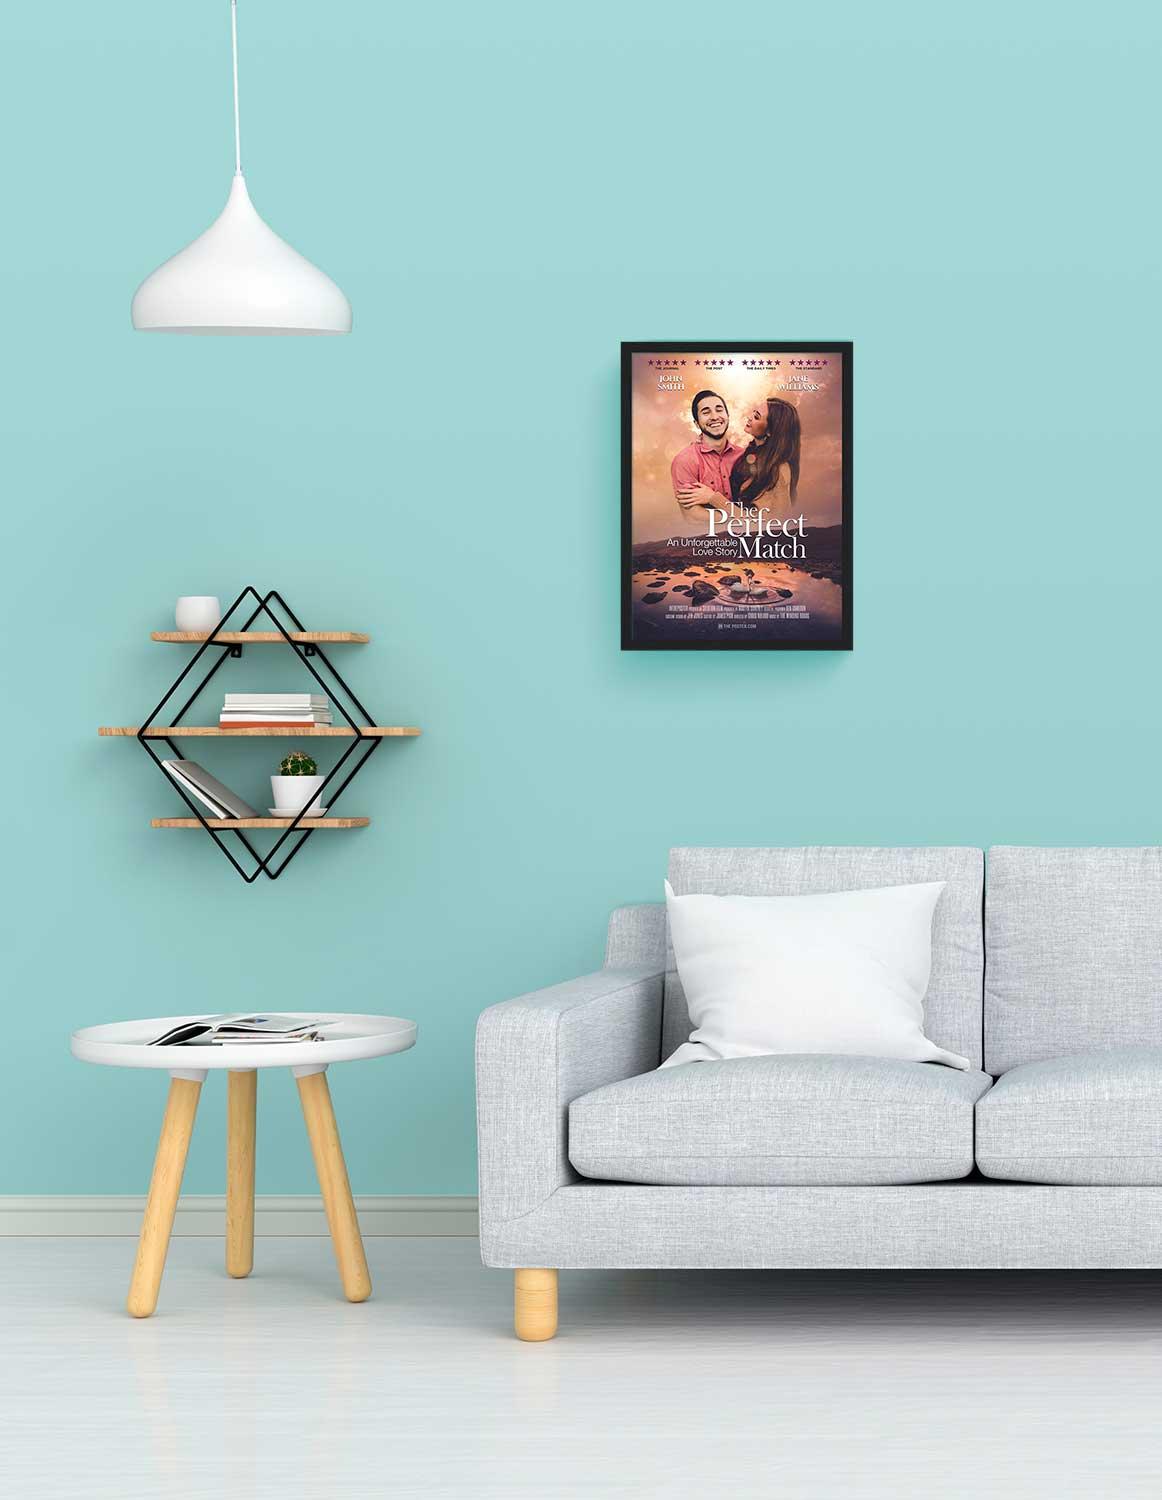 The perfect match romantic movie poster in a small black frame on a blue wall above a grey modern sofa